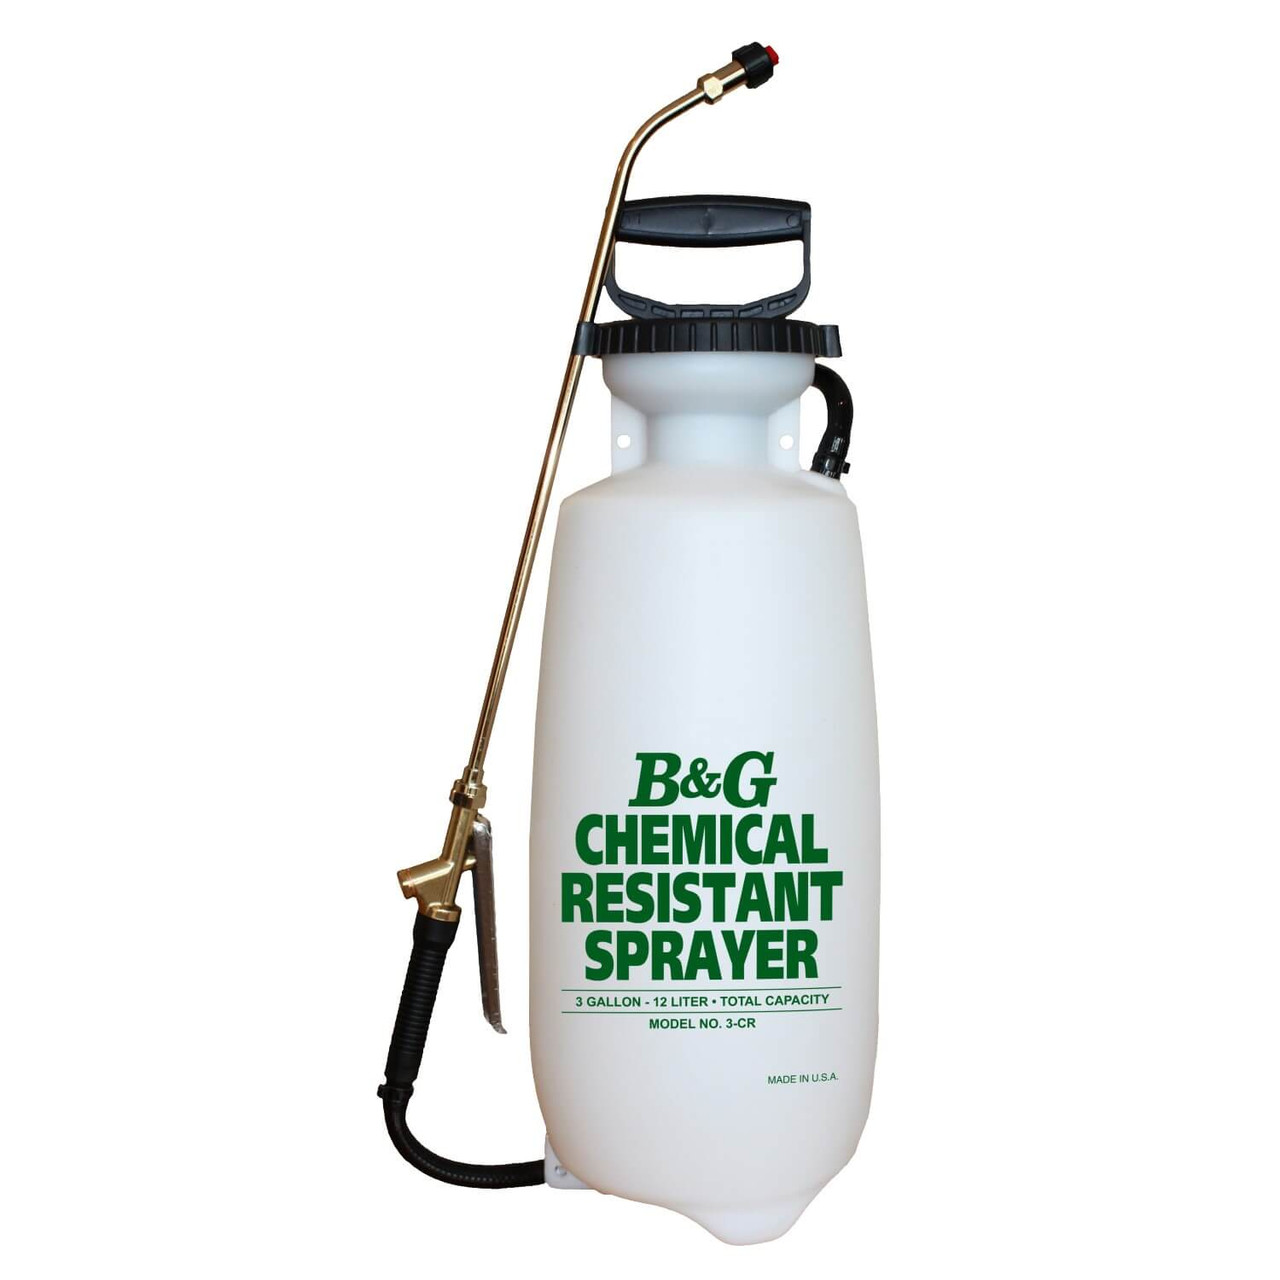 https://cdn11.bigcommerce.com/s-jnx9y5abi8/images/stencil/1280x1280/products/172/527/product-sprayer-plastic-chemical-resistant-sprayer-white__80732.1659465575.jpg?c=1